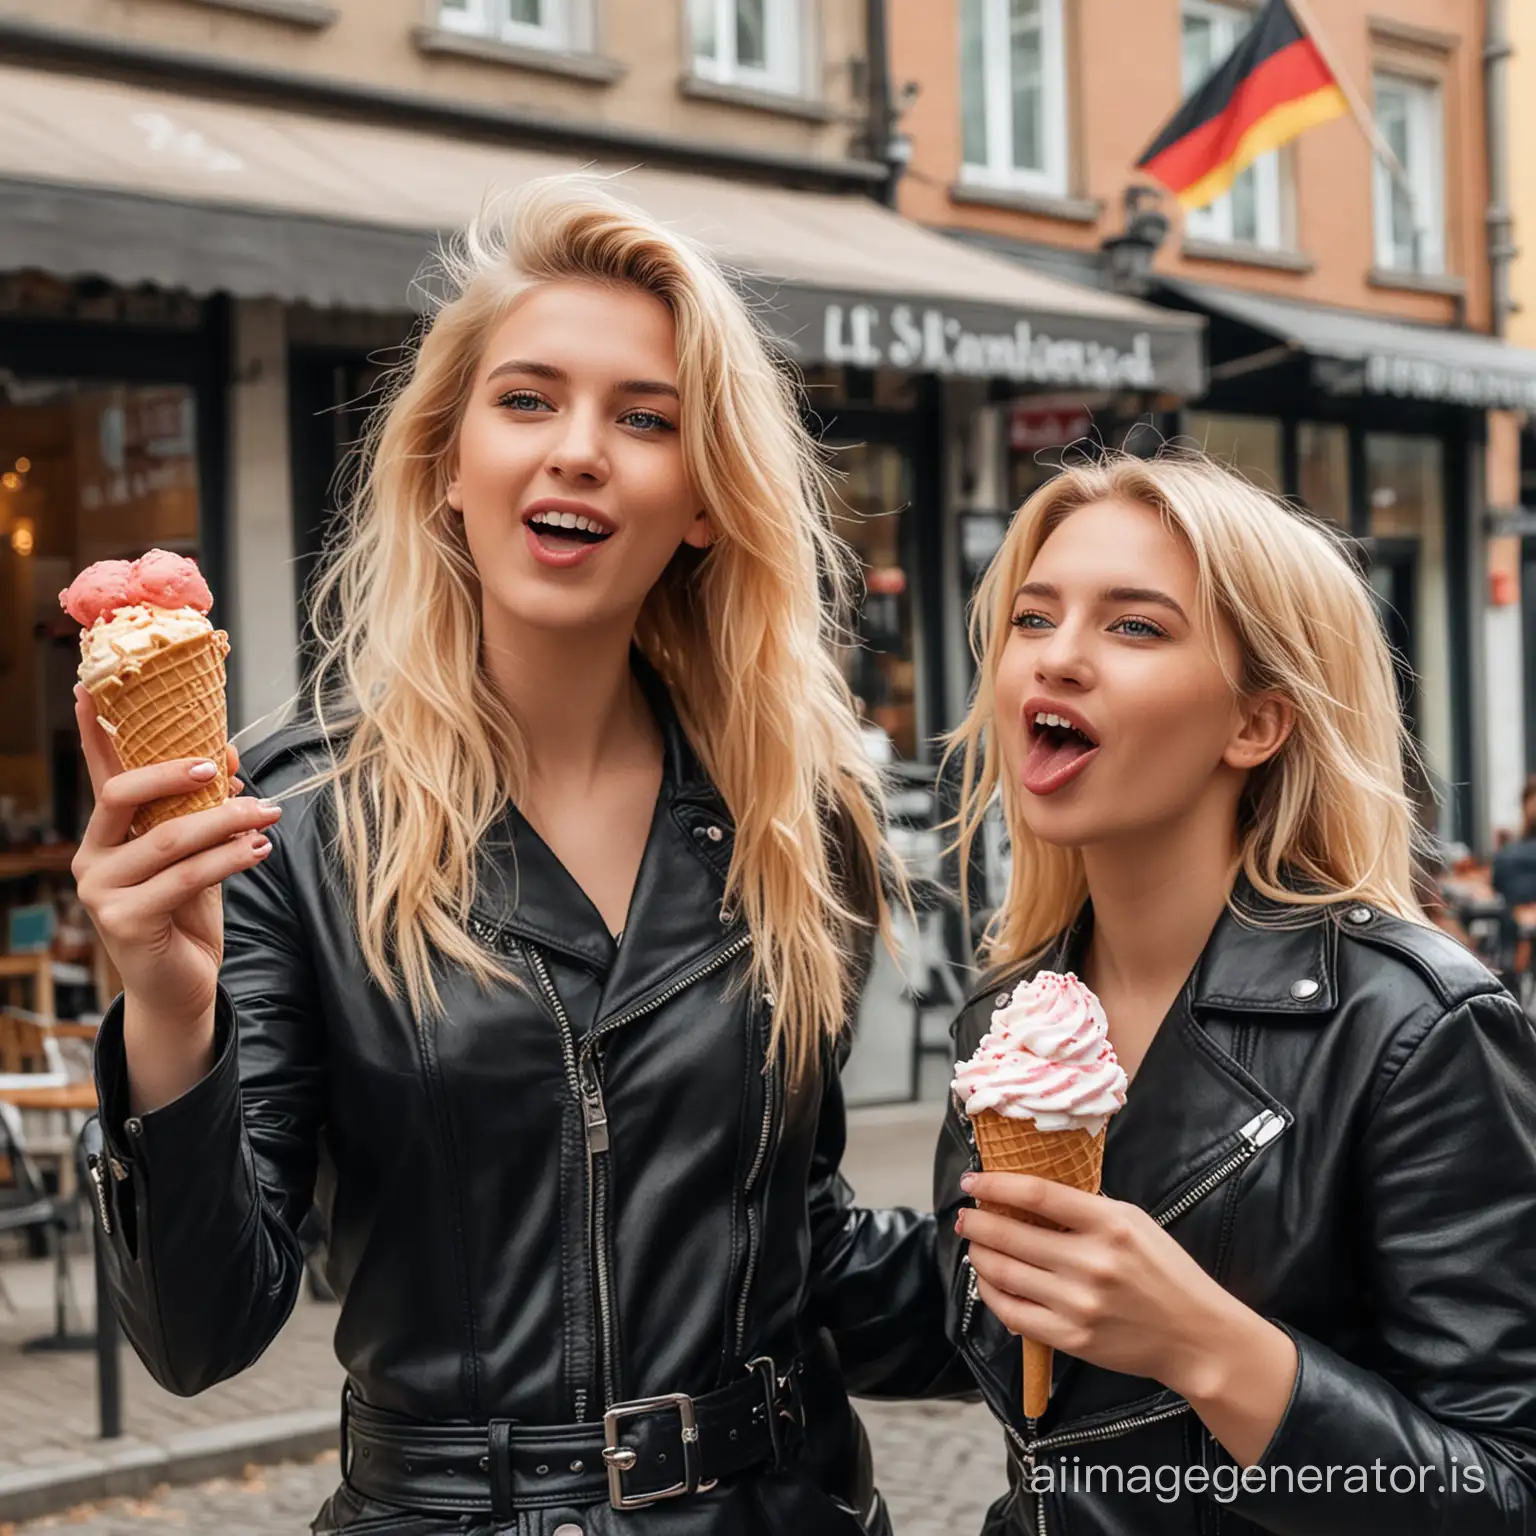 Two girls with short blonde. full hair with red streaks, dressed in black leather outfit, with cowboy boots on, are standing in front of a German “Eis Café” in the City of Berlin. In the backdrop a German Flag is waving in the wind. Both girls, face to face to each other, are holding in their hands a single ice cone, licking Ice Cream. One Girl is holding a mobile phone in one hand and making a selfie of both of them.